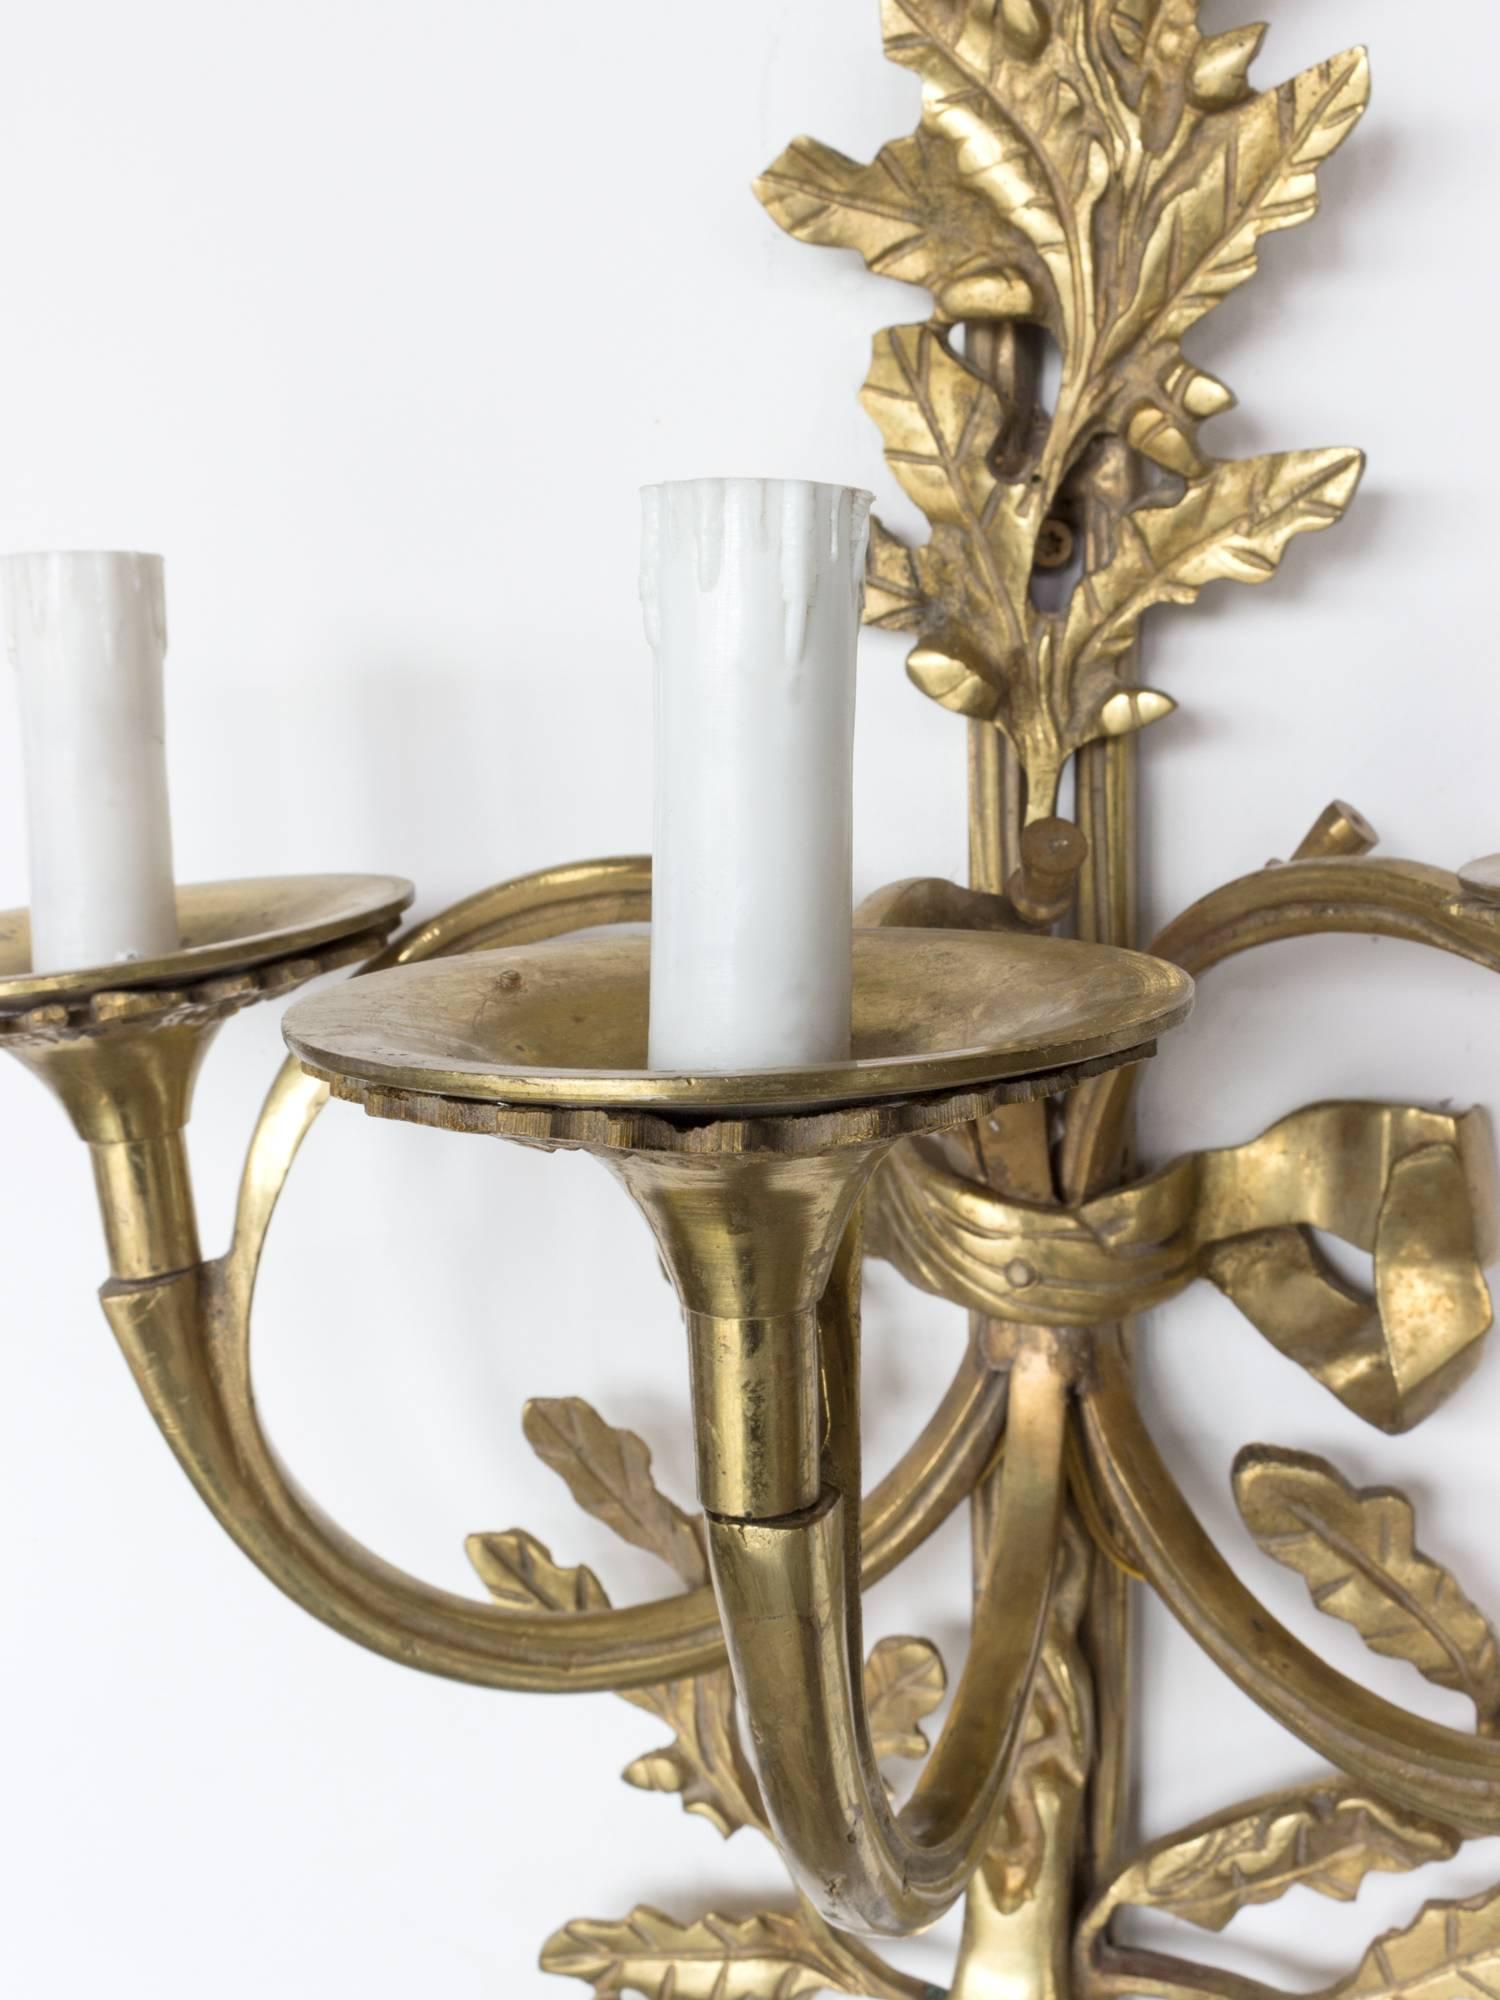 19th century gilded bronze French wall sconces.

Ornate Louis XVI style wall lights from the late 19th century (circa 1890s) from an apartment in Paris.

The gilded bronze design features ornamentation of foliage, tassels and bows. The fixtures